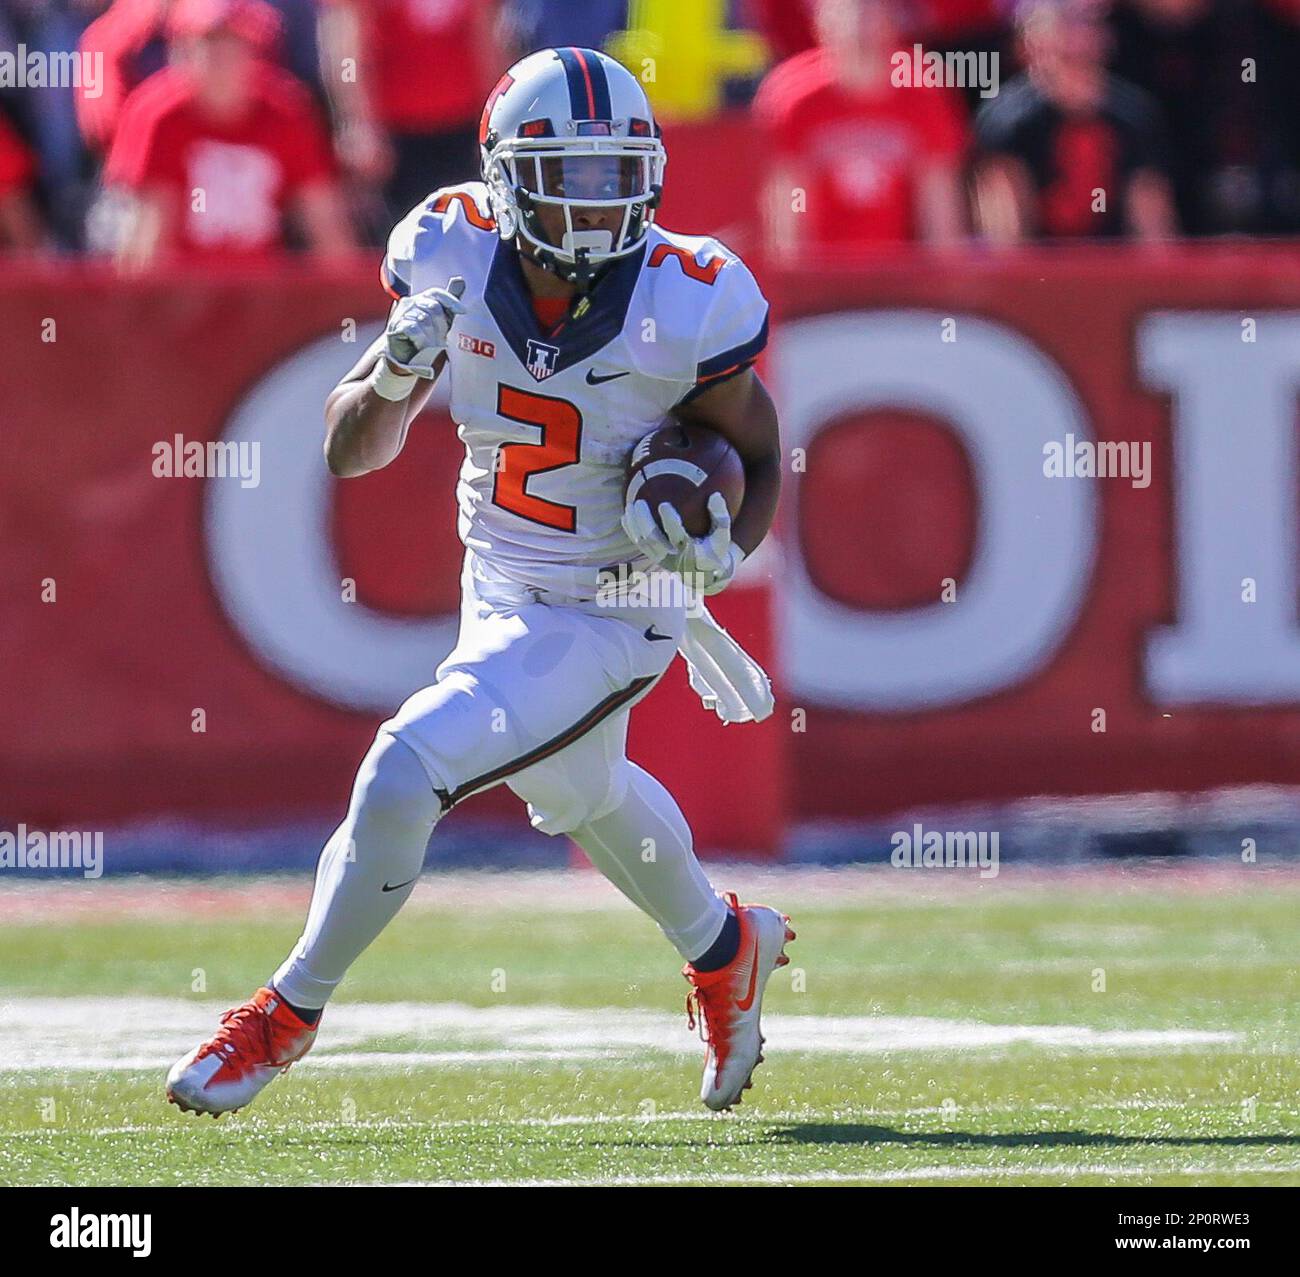 october-15-2016-illinois-fighting-illini-running-back-reggie-corbin-2-looks-upfield-for-some-running-room-during-an-ncaa-football-game-between-the-illinois-fighting-illini-and-the-rutgers-scarlet-knights-at-high-point-solutions-stadium-in-piscataway-nj-mike-langishcal-sport-media-cal-sport-media-via-ap-images-2P0RWE3.jpg